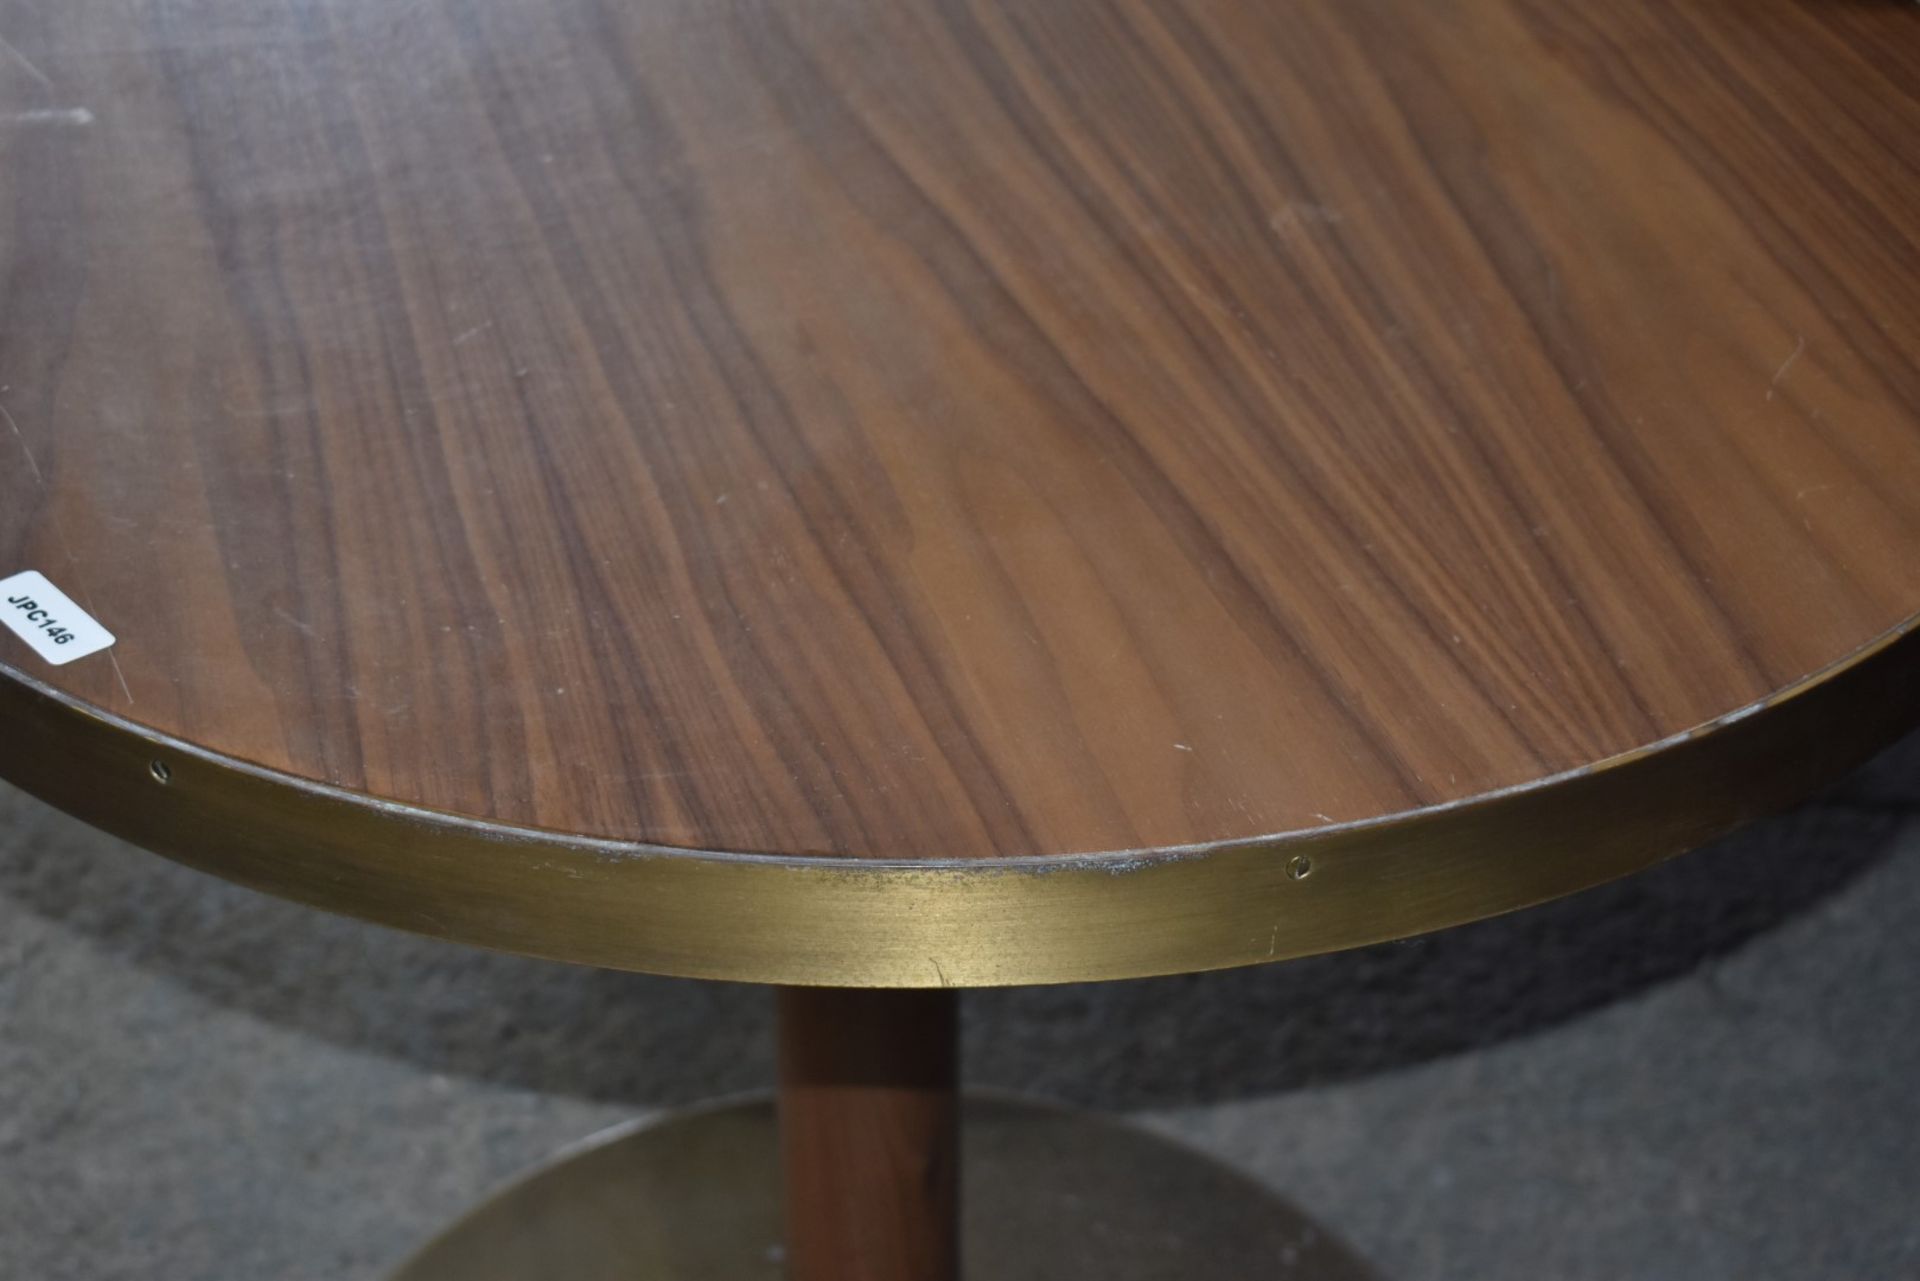 1 x Oval Banqueting Dining Table By AKP Design Athens - Walnut Top With Antique Brass Edging - Image 3 of 16